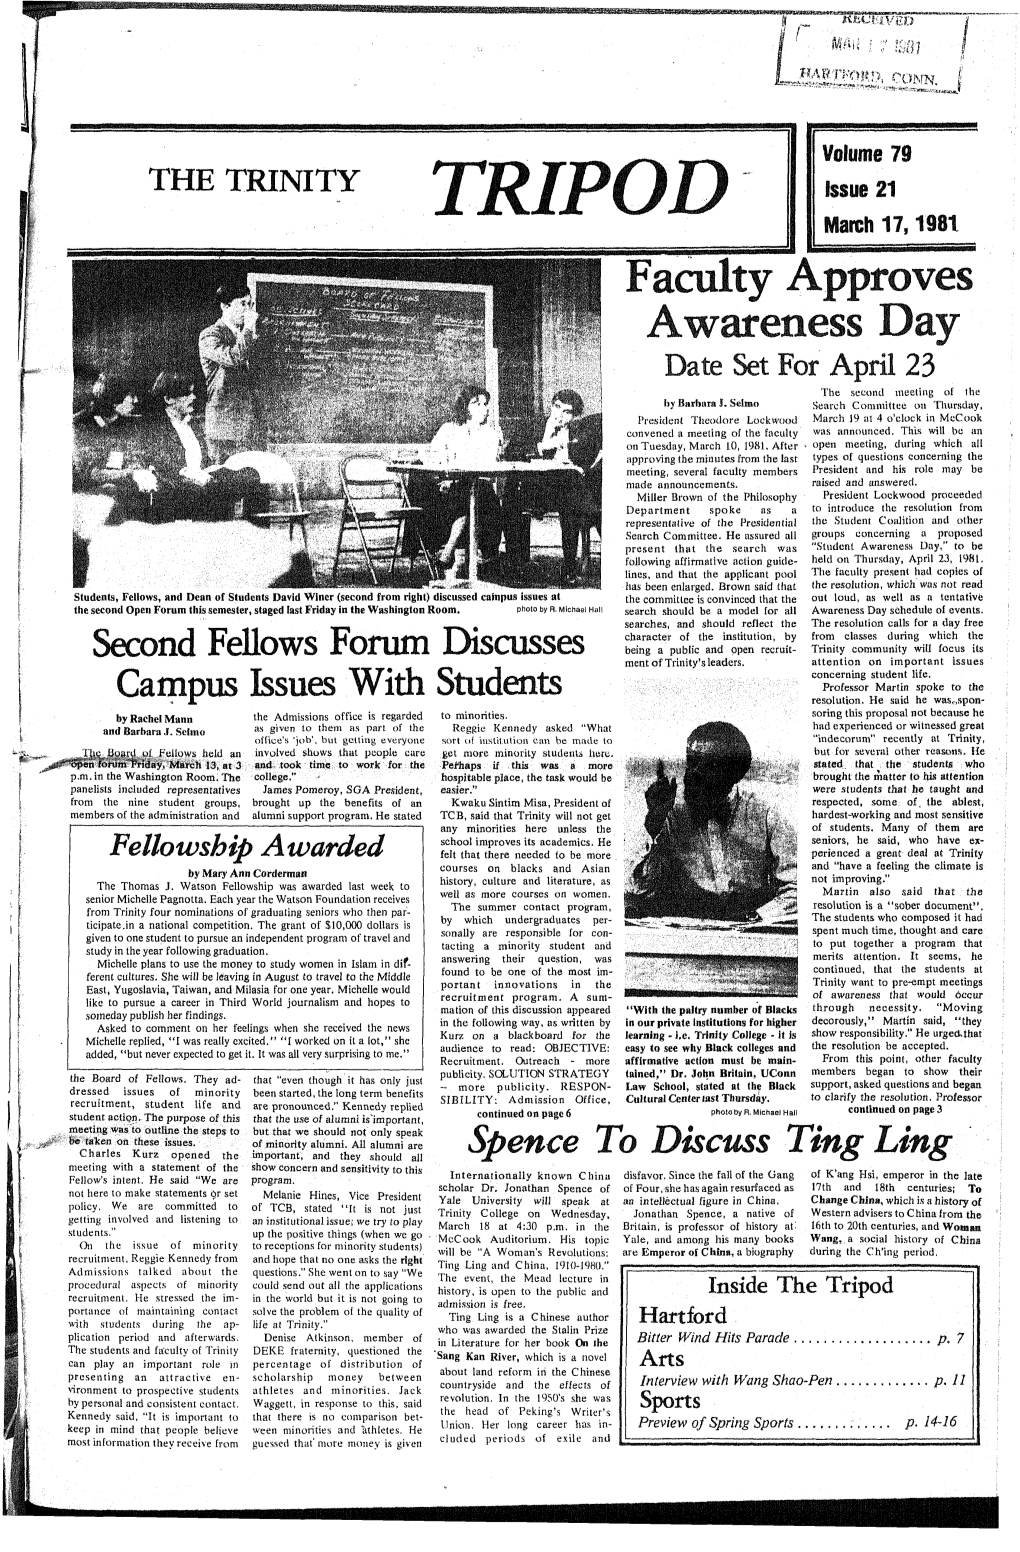 TRIPOD March 17,1981 Faculty Approves Awareness Day Date Set for April 23 the Second Meeting of the by Barbara J